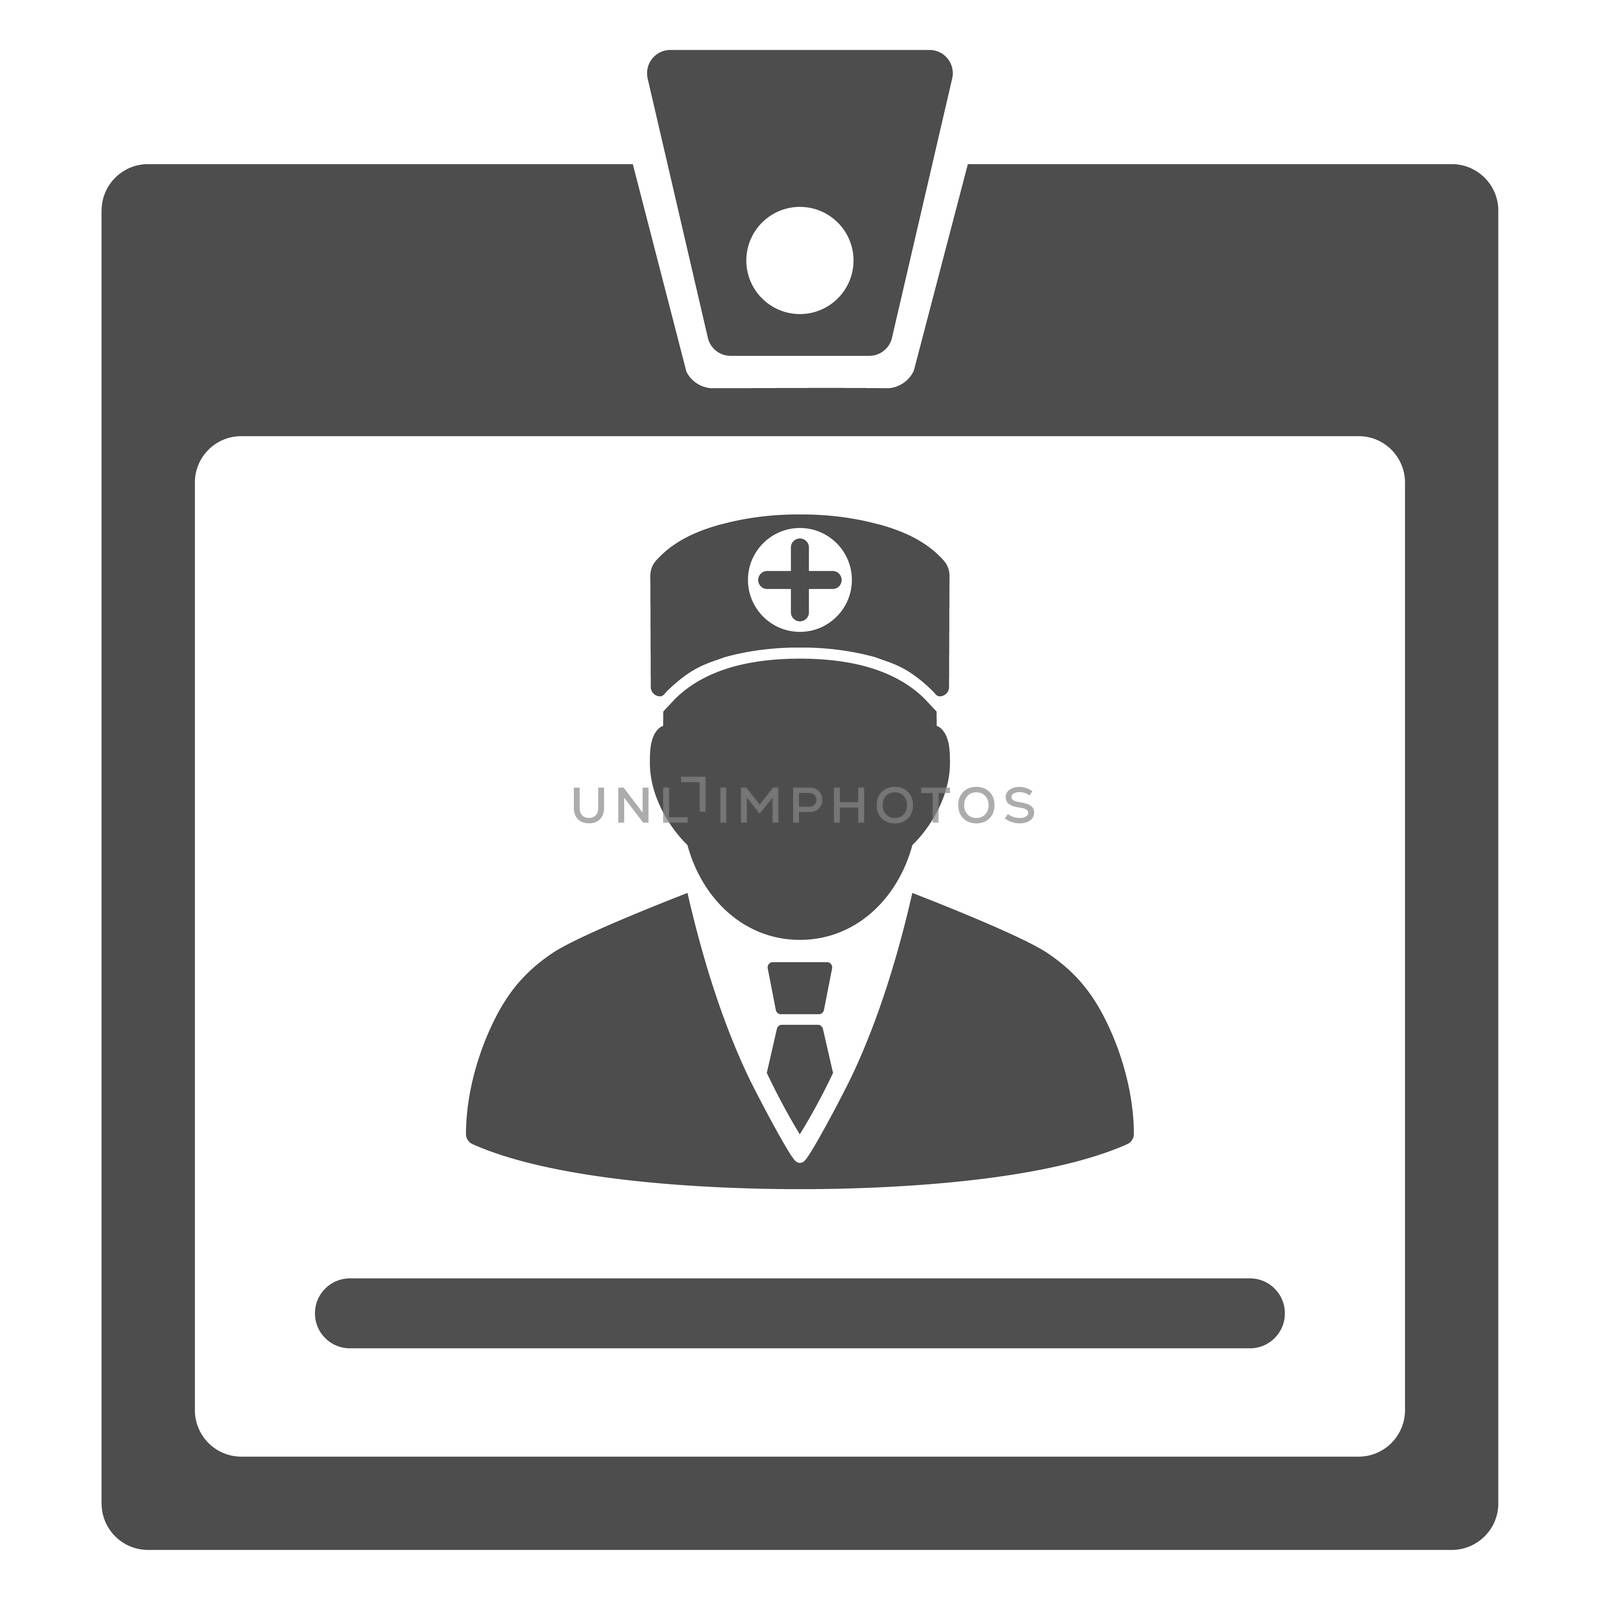 Doctor Badge raster icon. Style is flat symbol, gray color, rounded angles, white background.